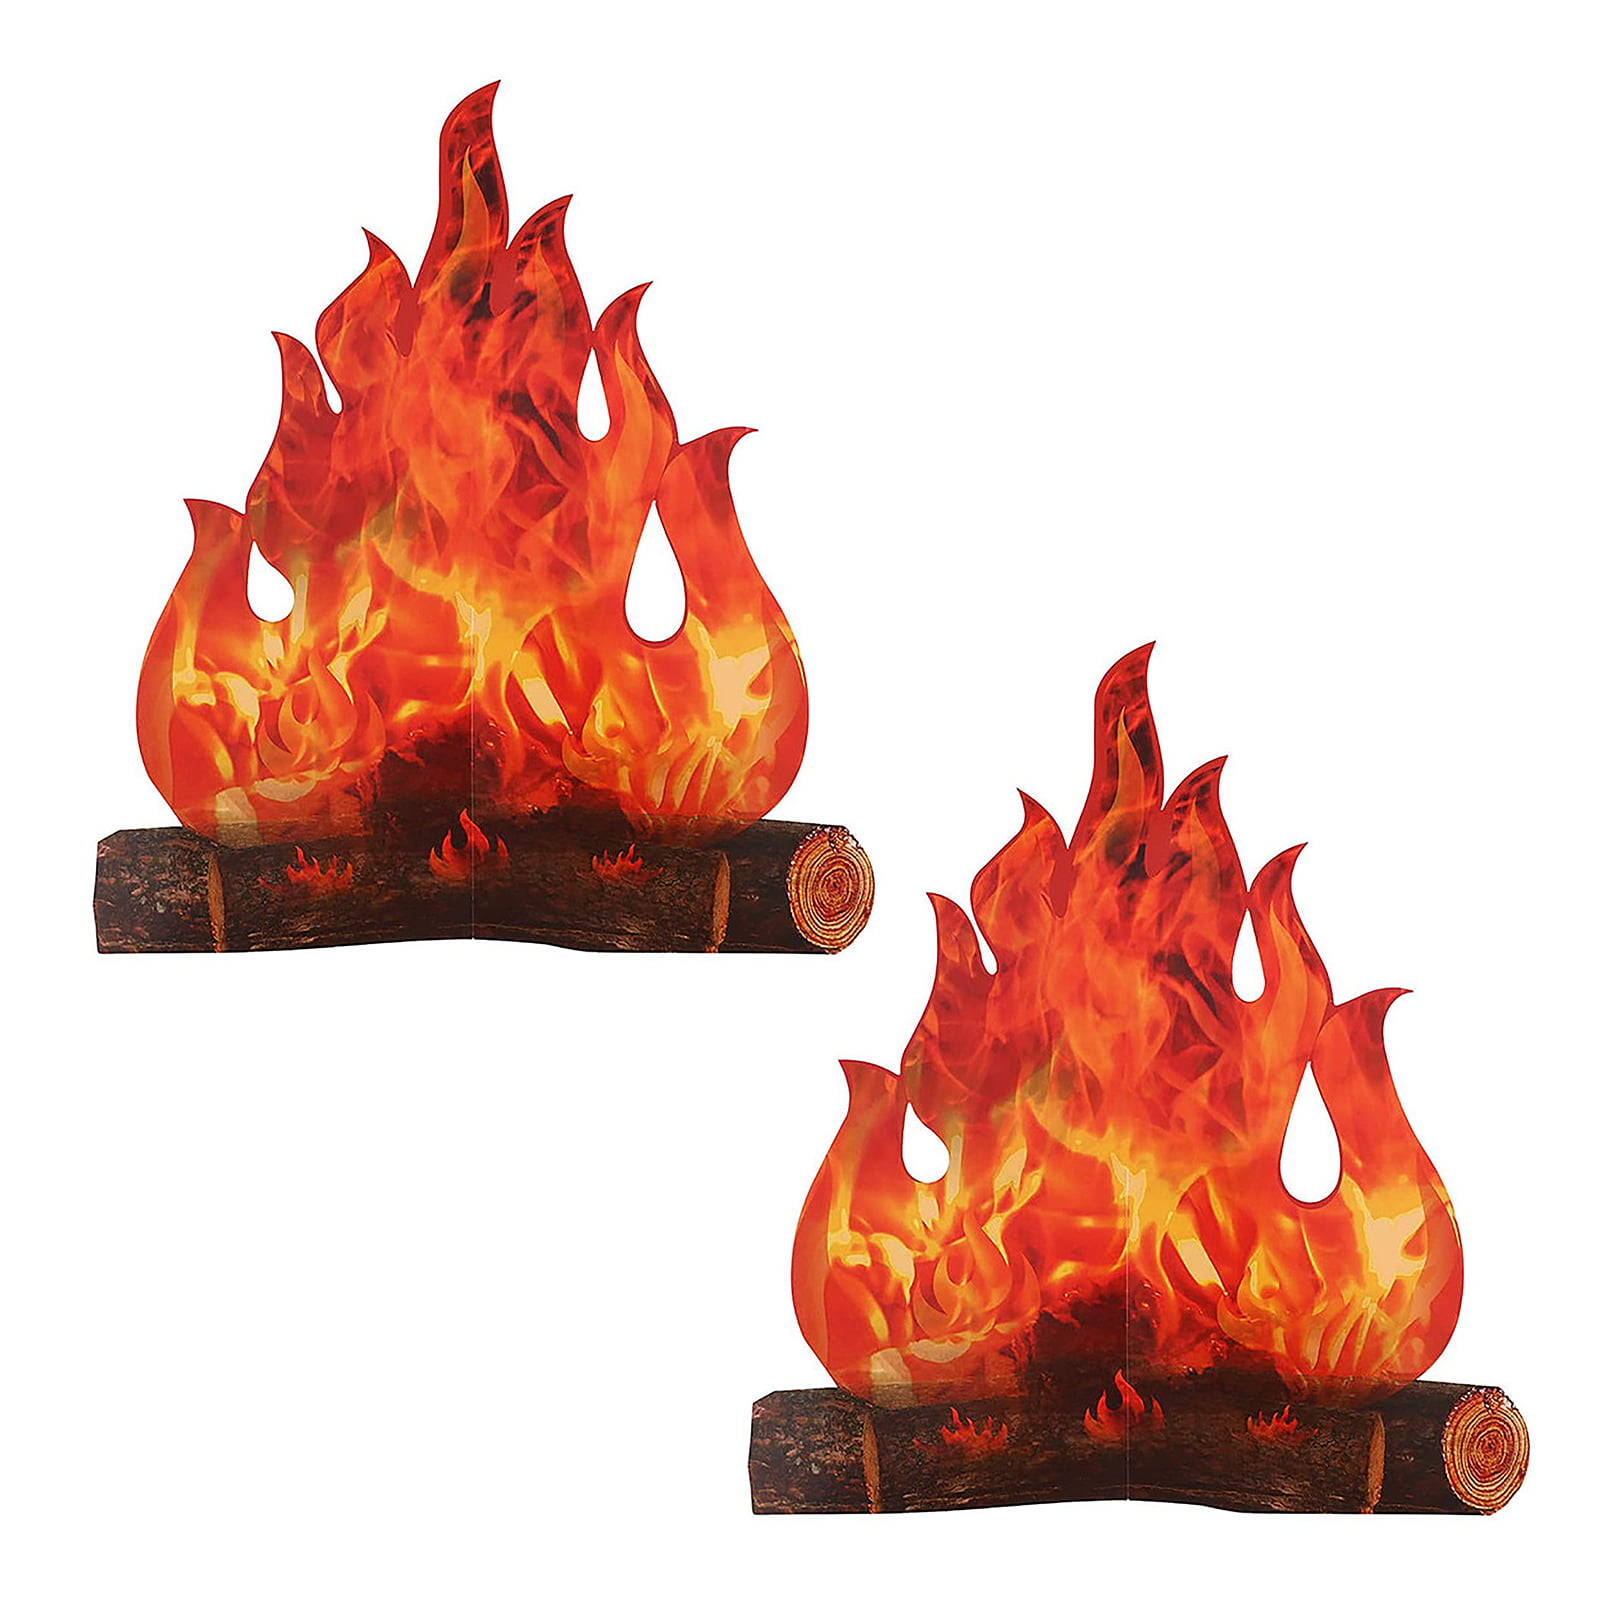 2pc / set 12 Inch Height Artificial Paper Fire Fake Flame 3D Cardboard ...